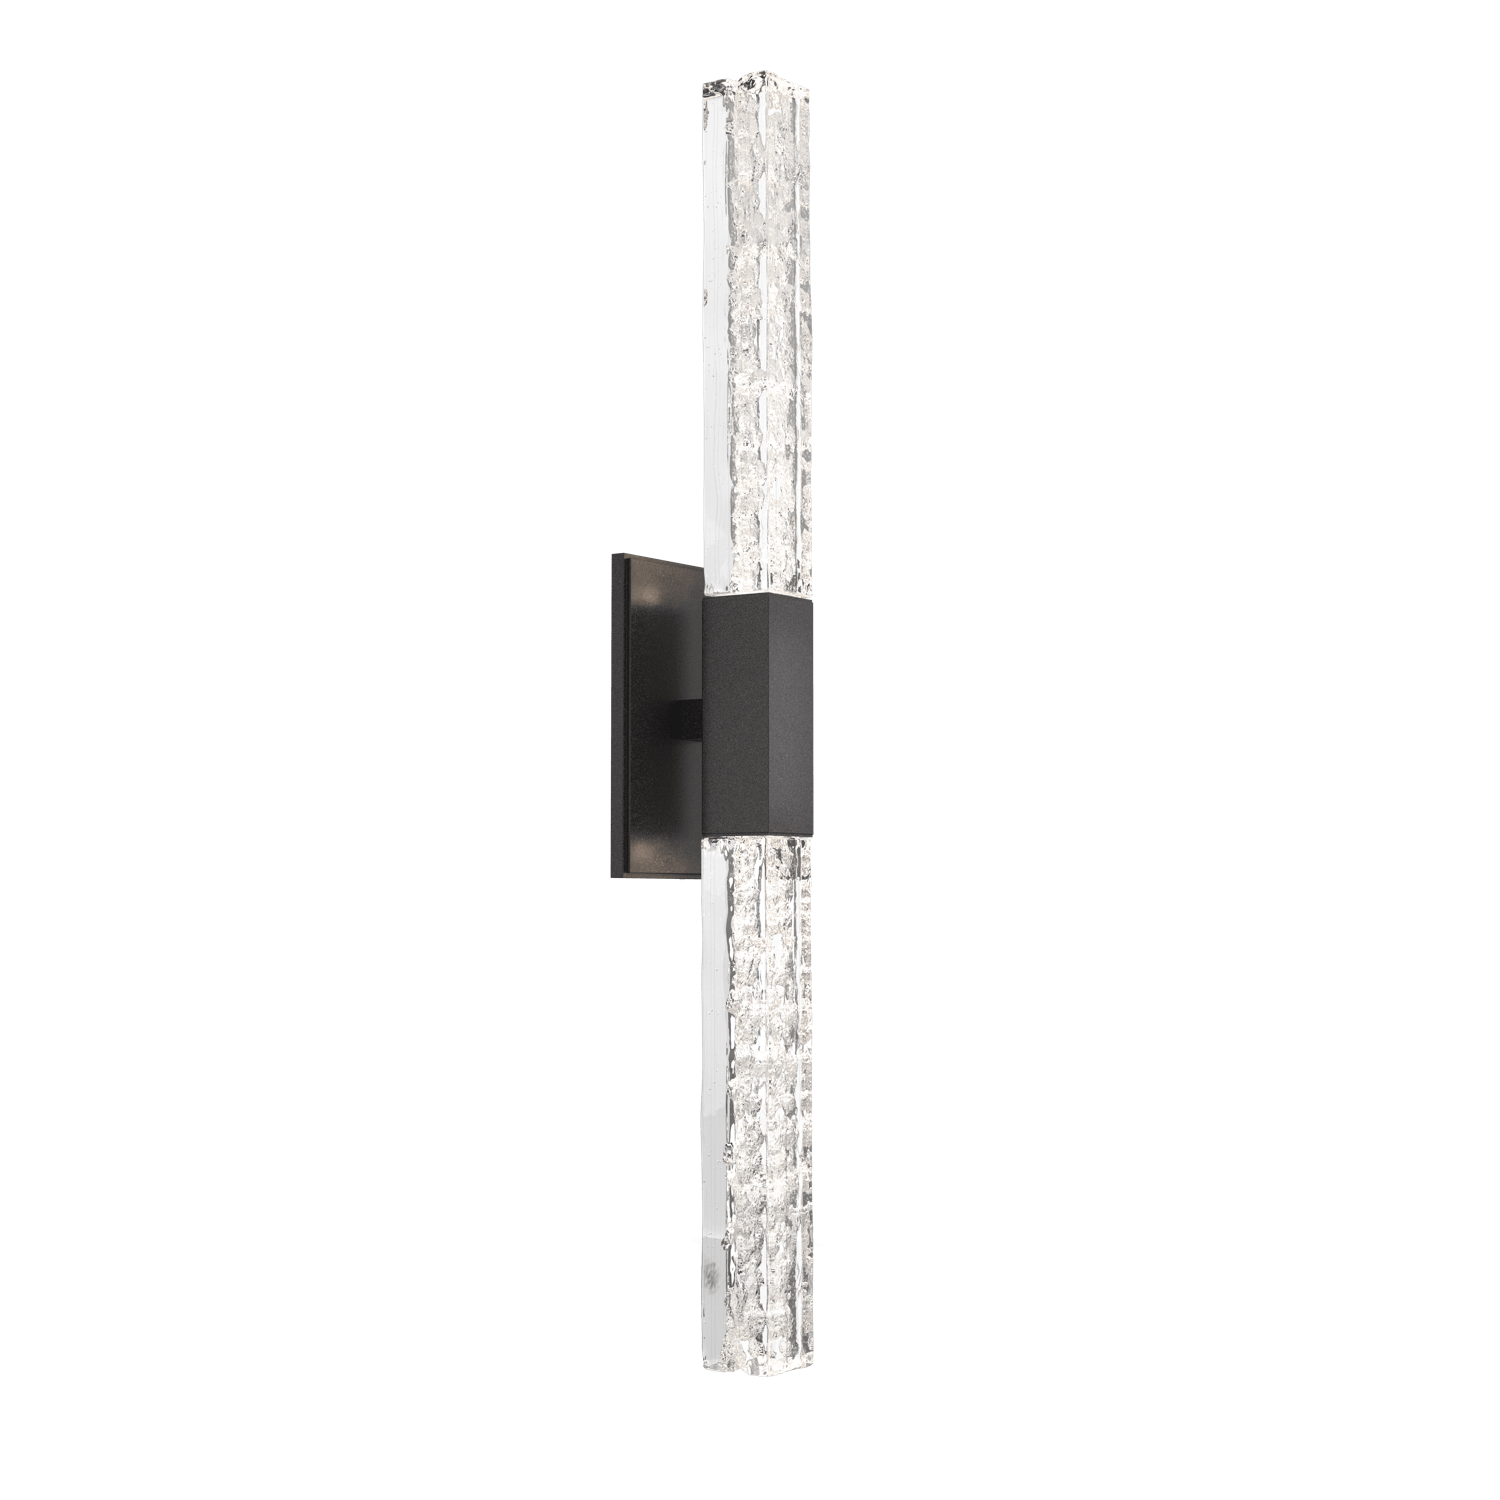 IDB0060-02-GP-GC-Hammerton-Studio-Axis-Double-Wall-Sconce-with-Graphite-finish-and-clear-cast-glass-and-LED-lamping